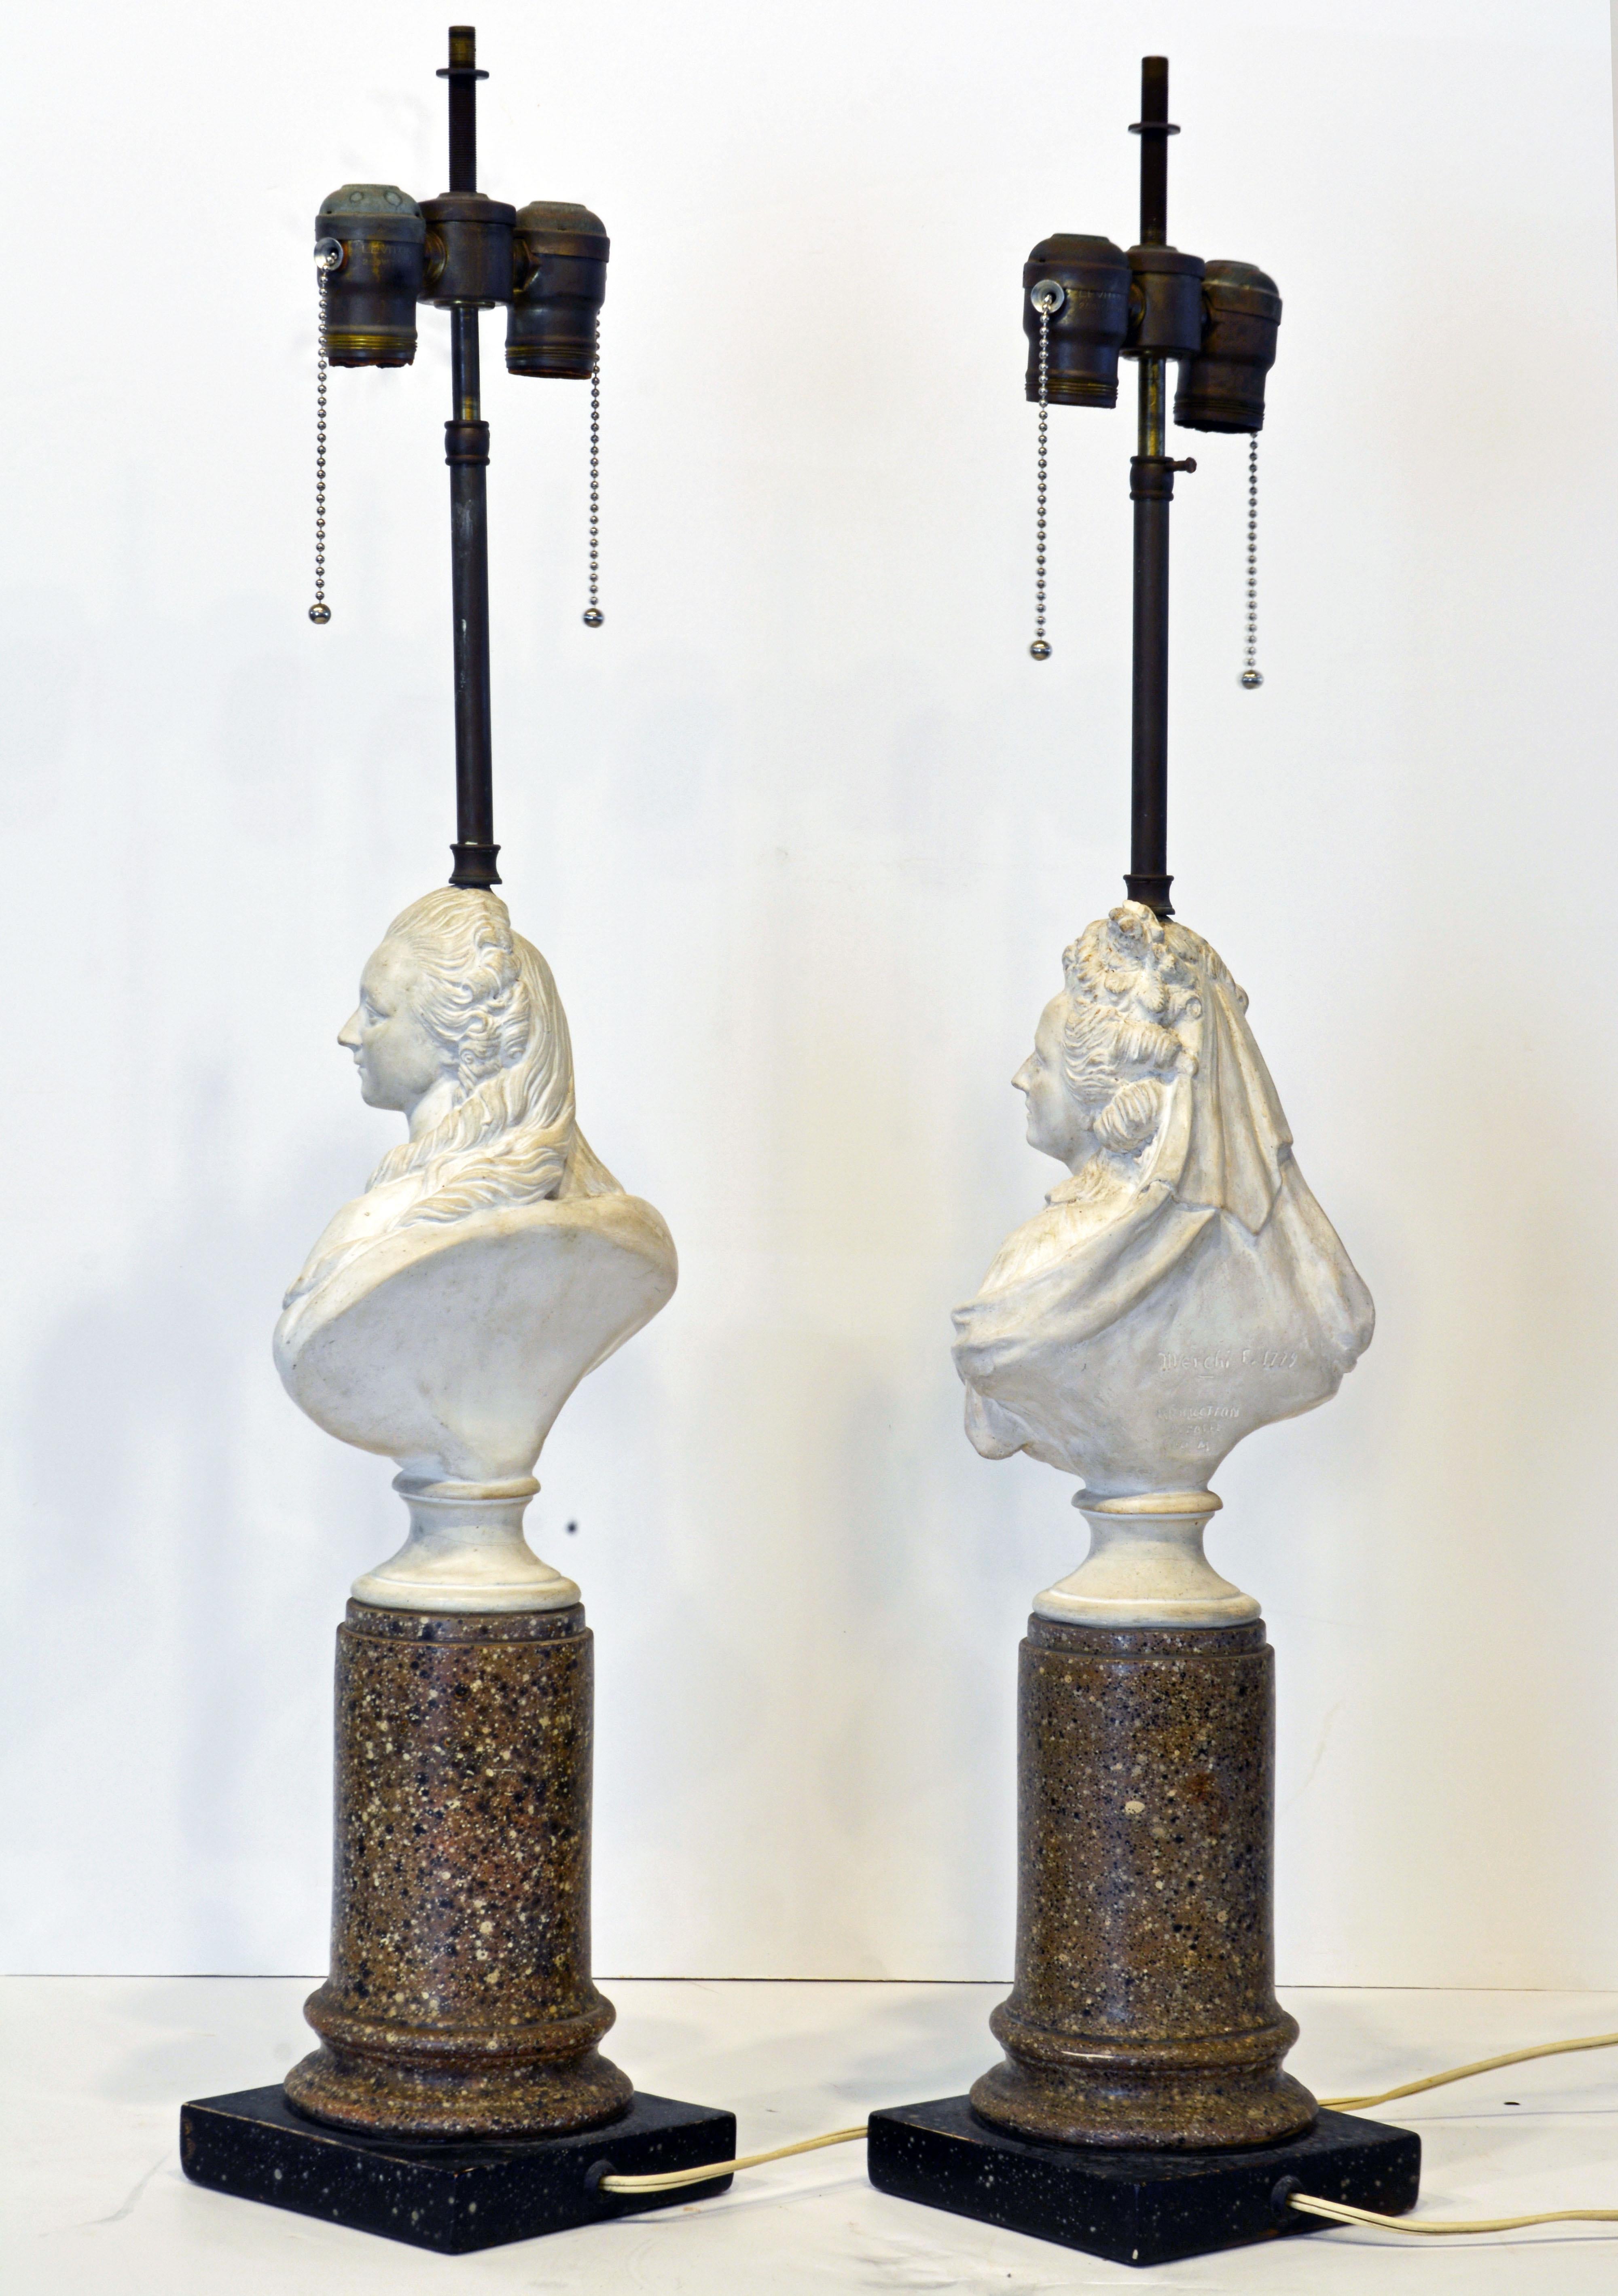 These Italian Borghese table lamps feature composition bust of two individual ladies of the nobility after Gaetano March (1747-1823) mounted on faux reddish marble columns and dark bases. Original Borghese label on the bottom.

  